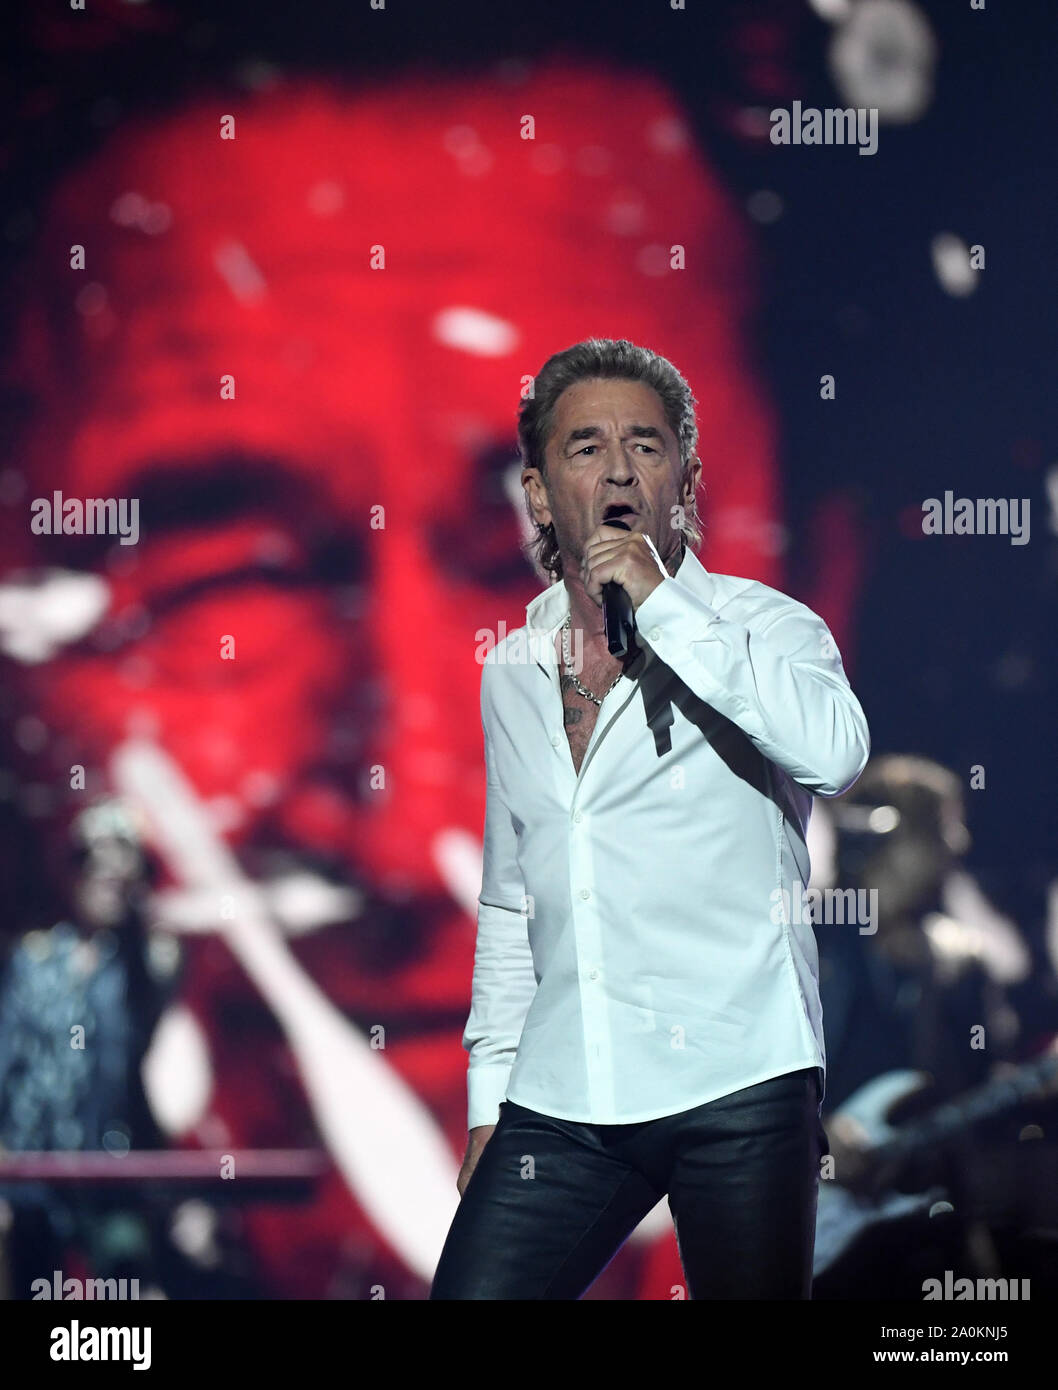 Leipzig, Germany. 20th Sep, 2019. Peter Maffay sings 'Golden Henne' during the TV gala. A total of 53 nominees from show business, society and sport can hope for the award. The Golden Hen is dedicated to the GDR entertainer Hahnemann, who died in 1991. Credit: Hendrik Schmidt/dpa-Zentralbild/dpa/Alamy Live News Stock Photo